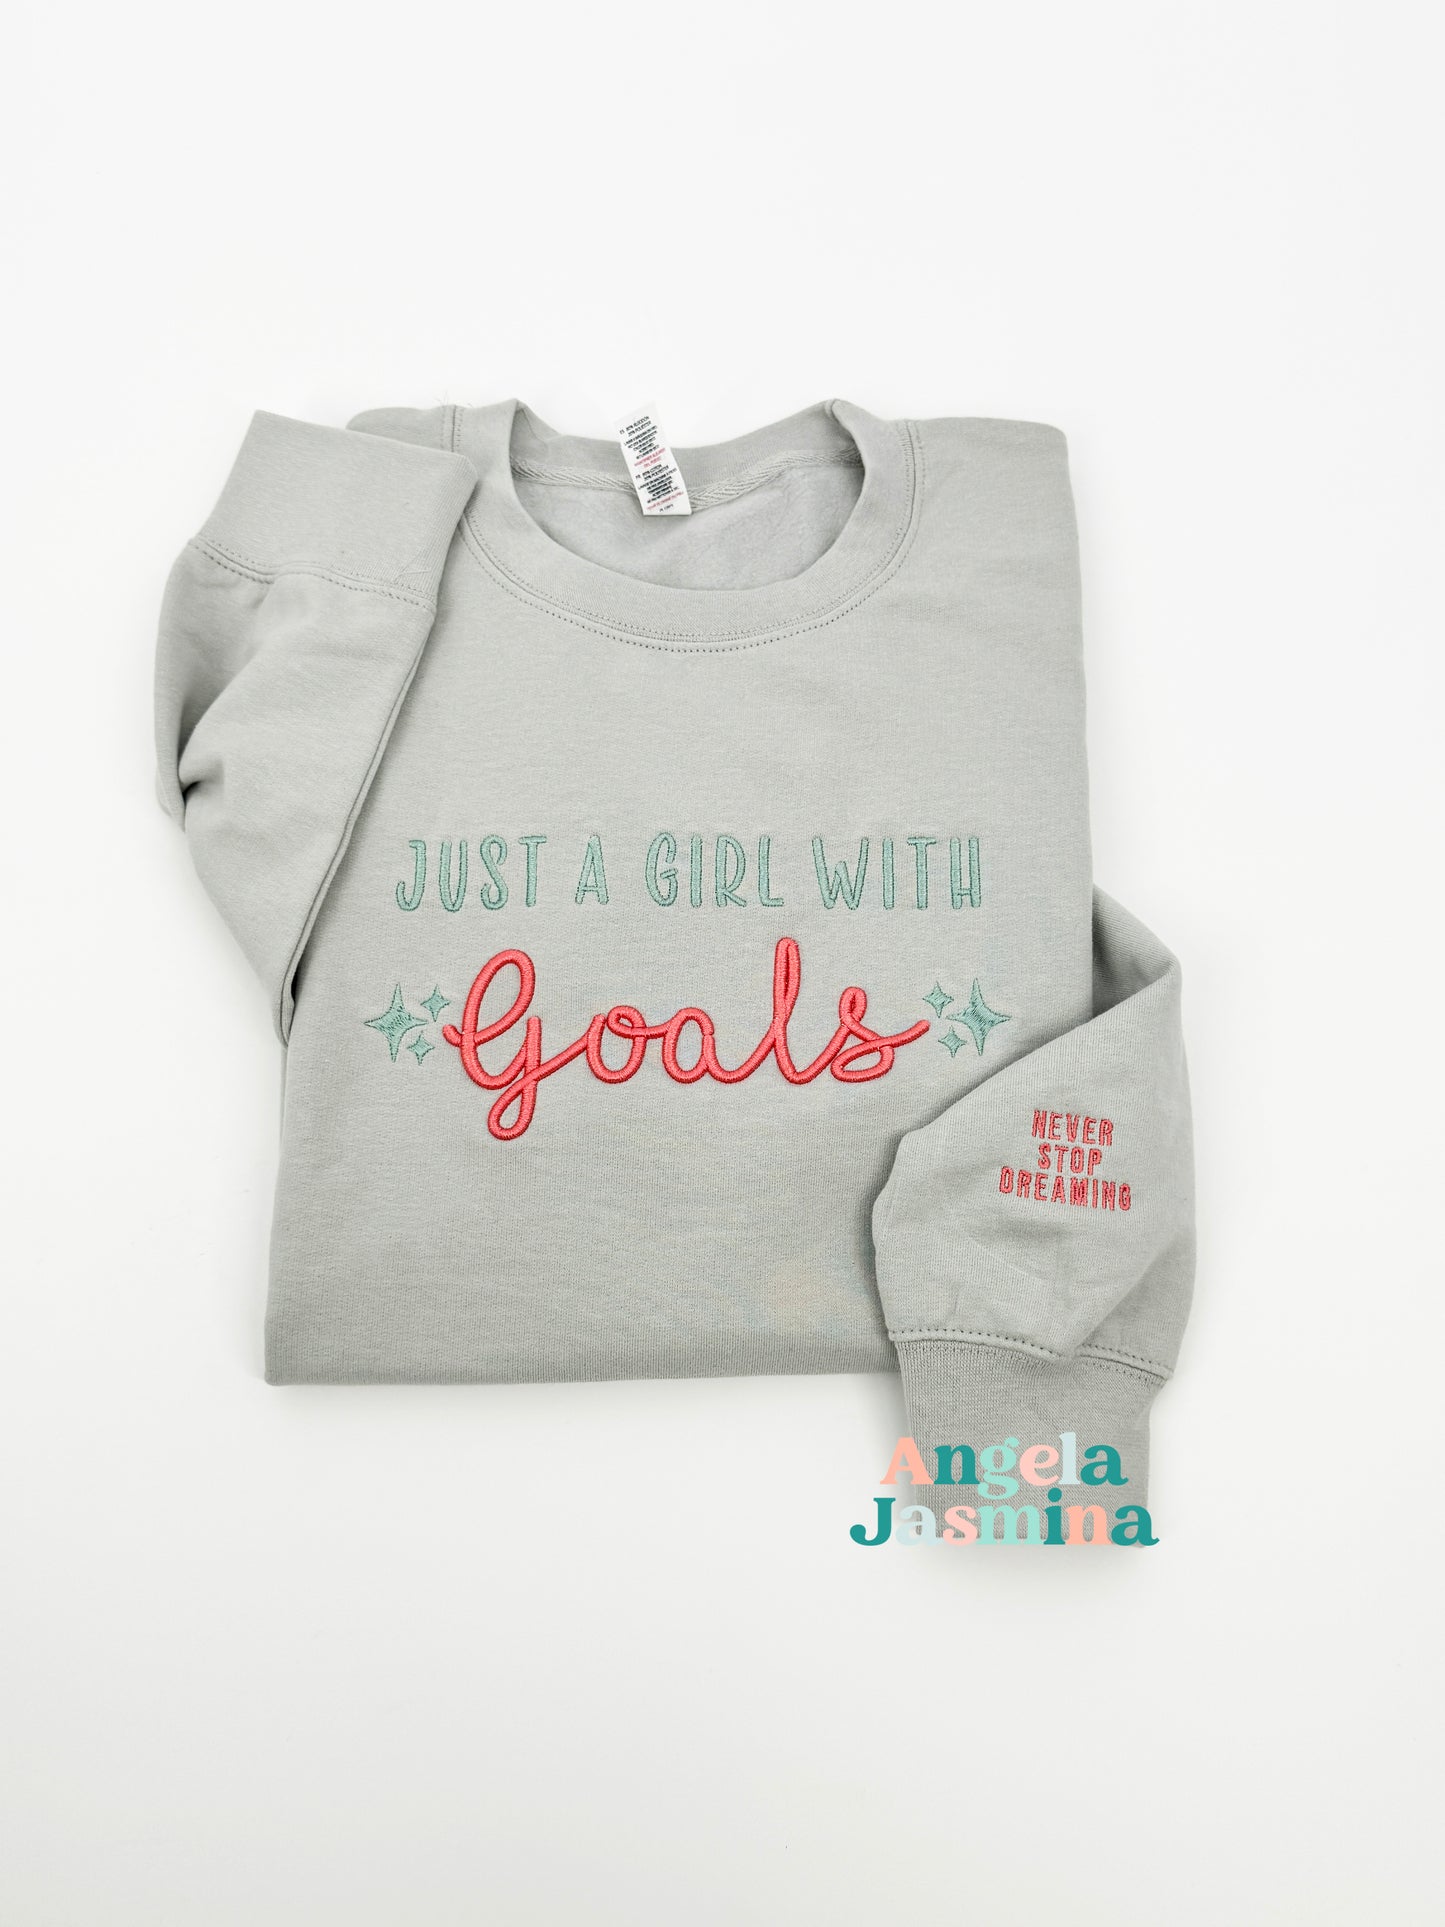 Grey Just a girl with Goals (puff)  Embroidered Sweatshirt (Never stop dreaming)